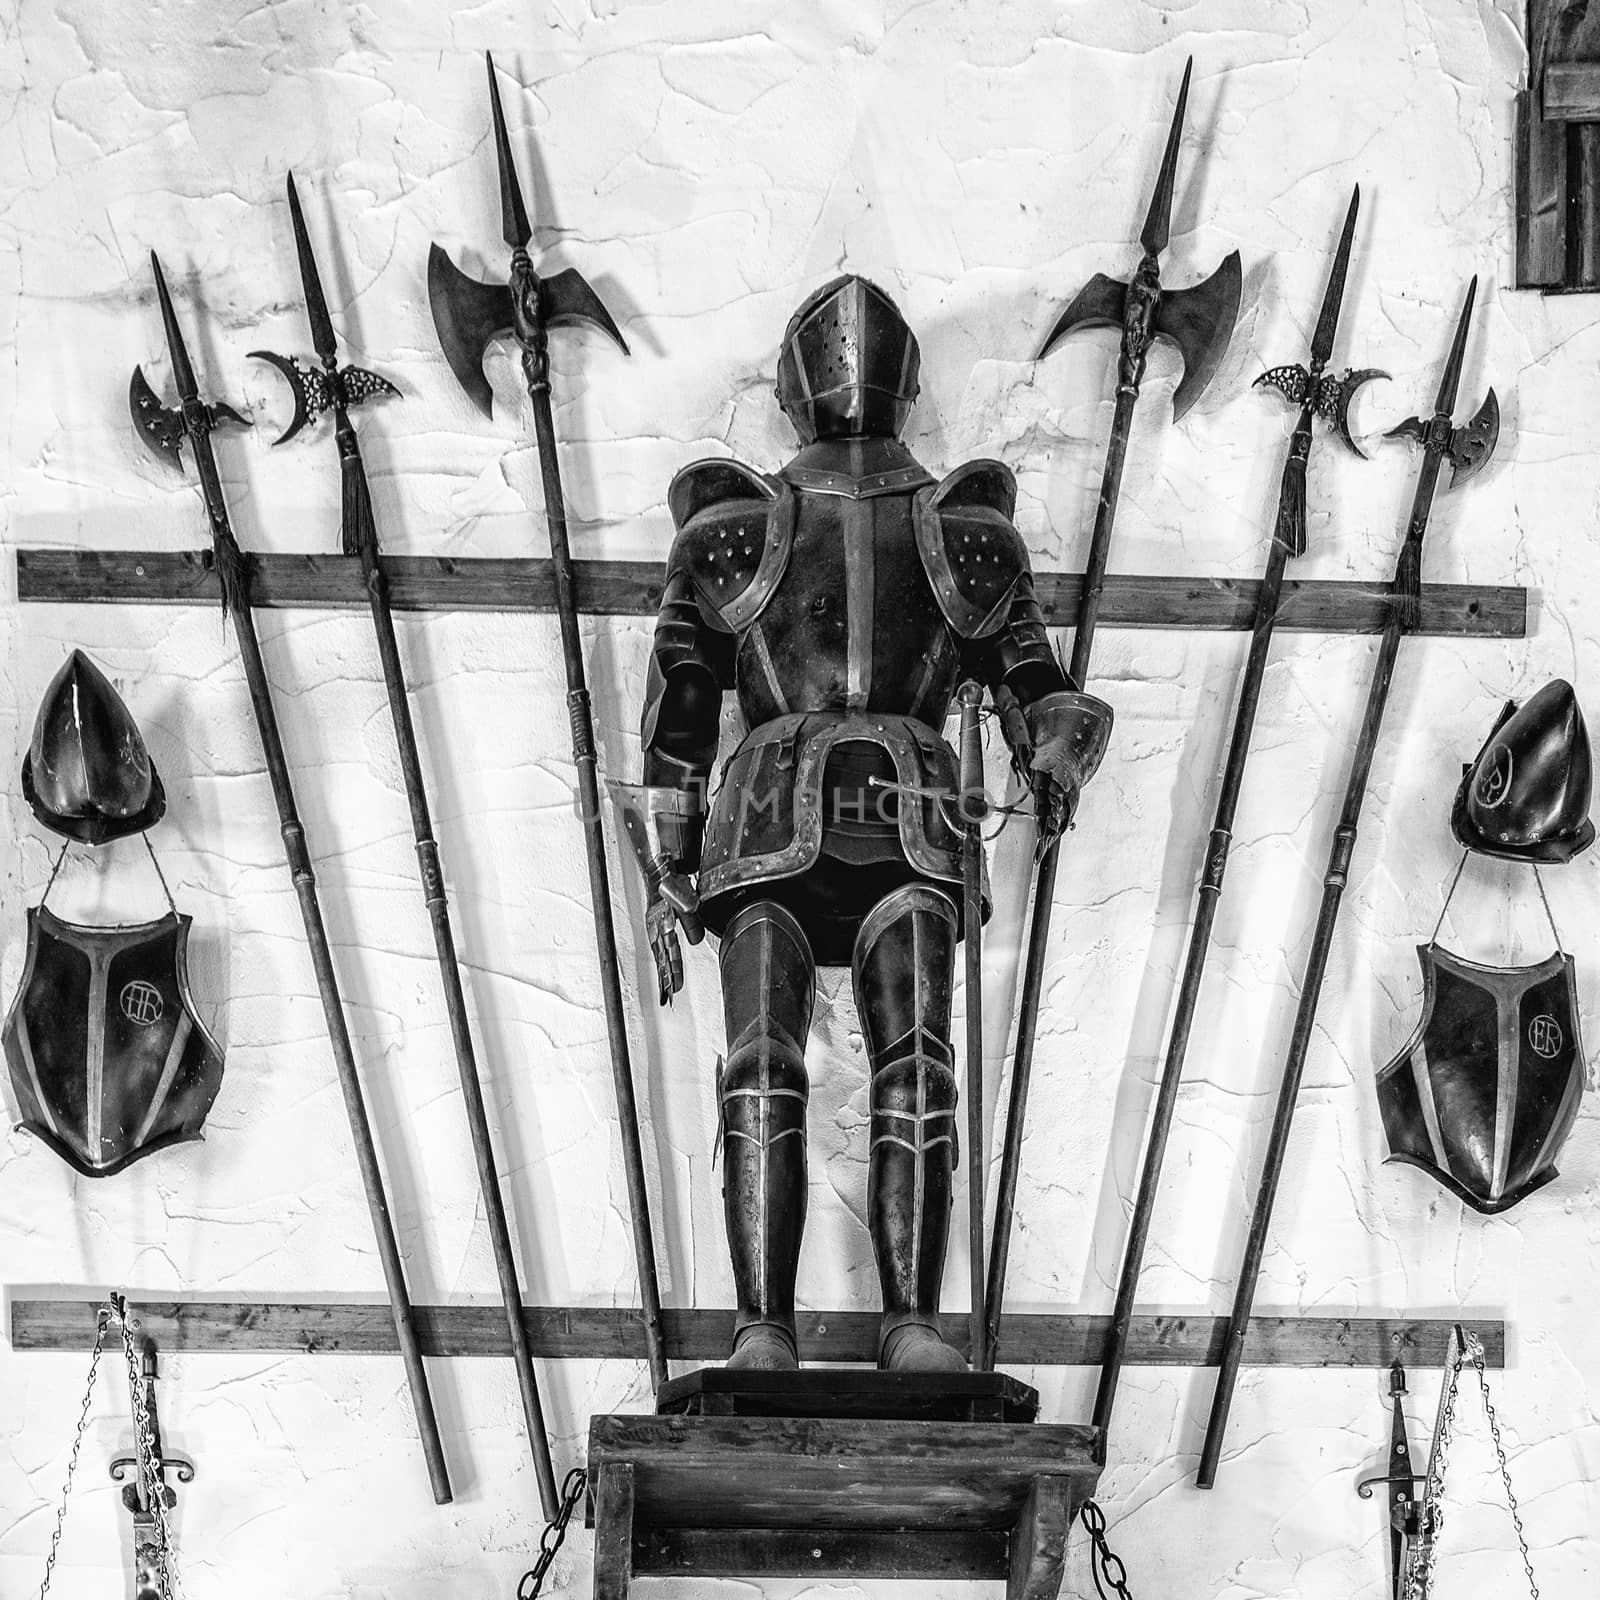 Medieval armor exposed with metal halberds. by Isaac74